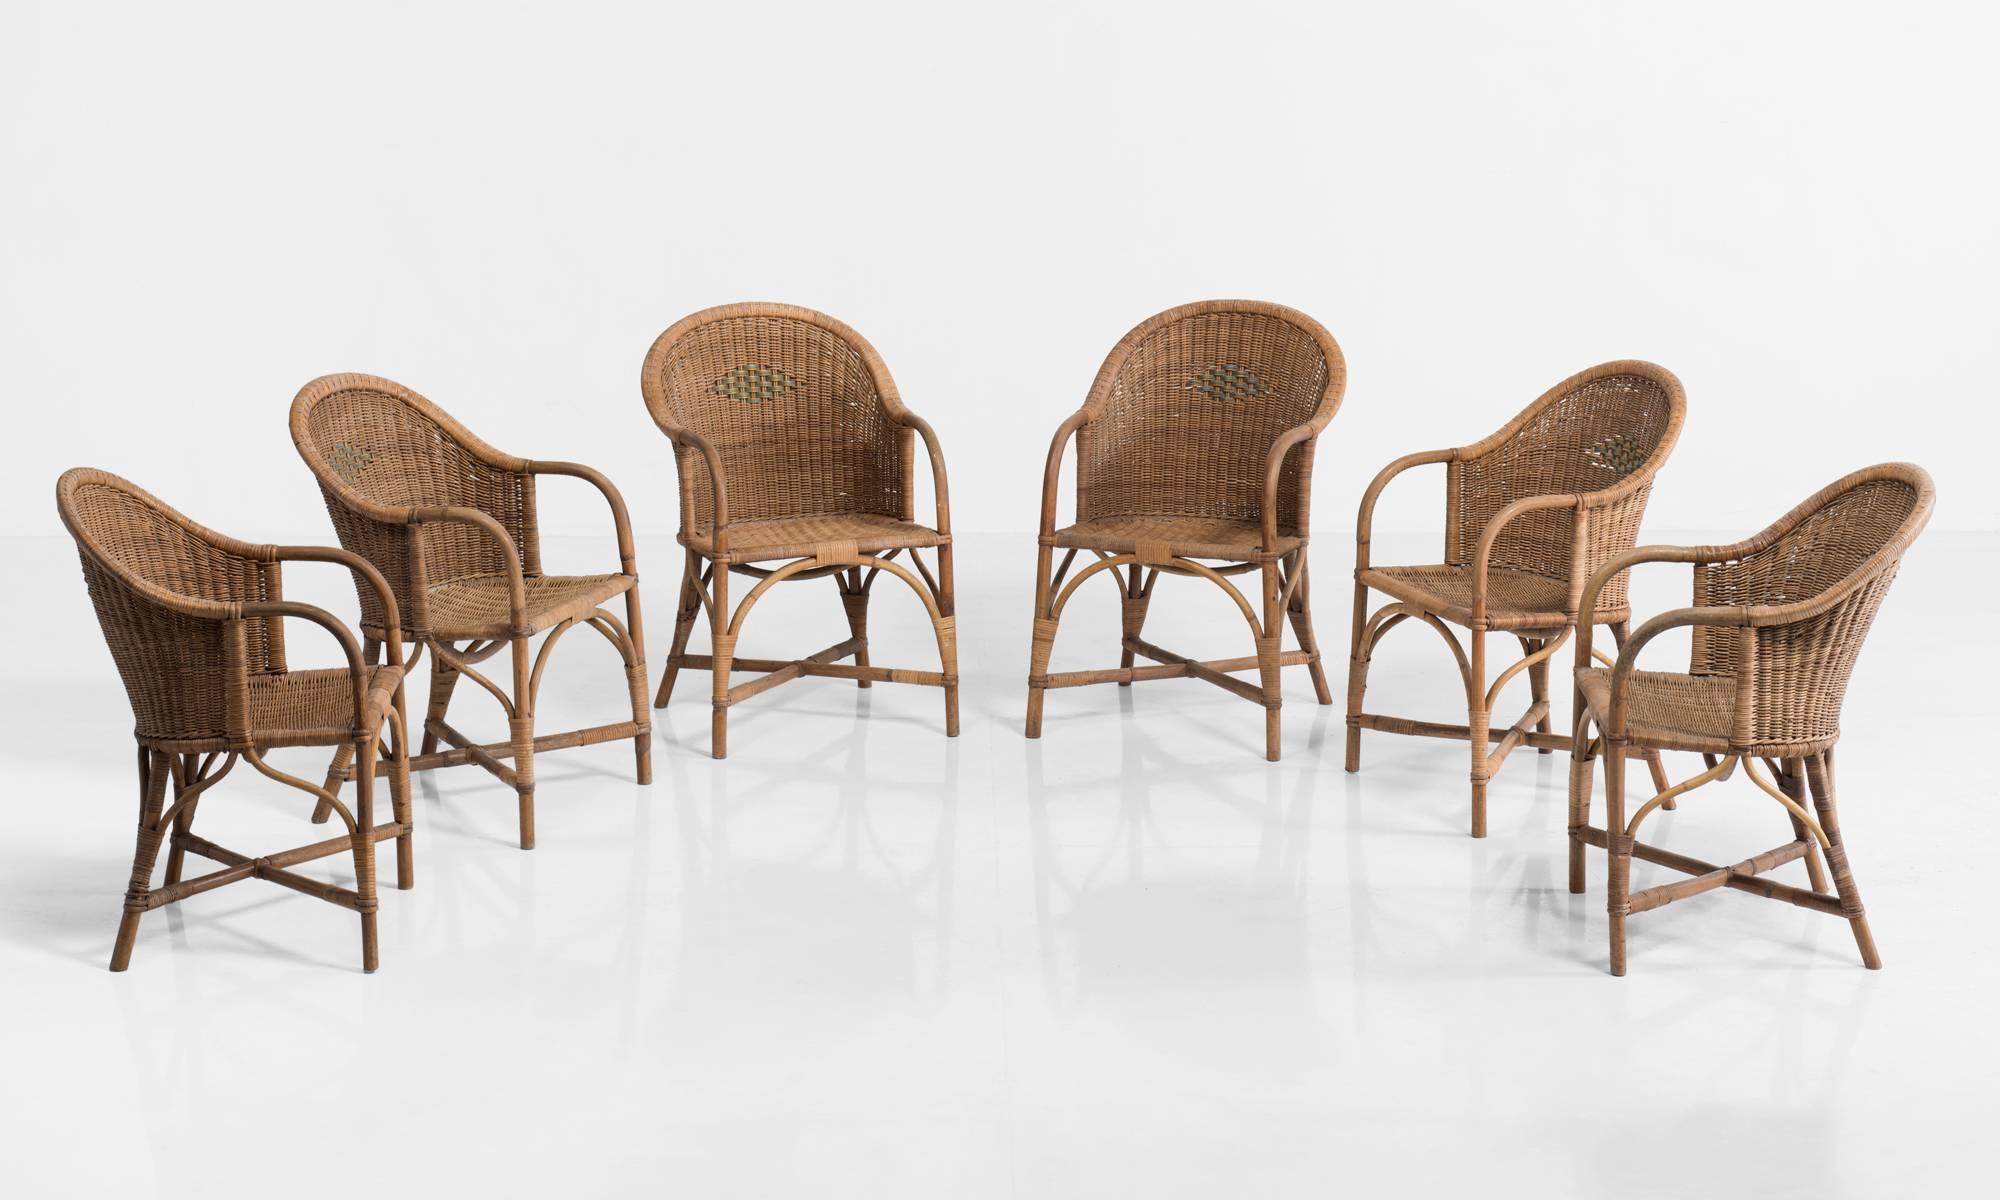 Wicker garden armchairs, circa 1910.

Woven armchairs made by Dryad, and retailed through Heals of London. All in original condition.